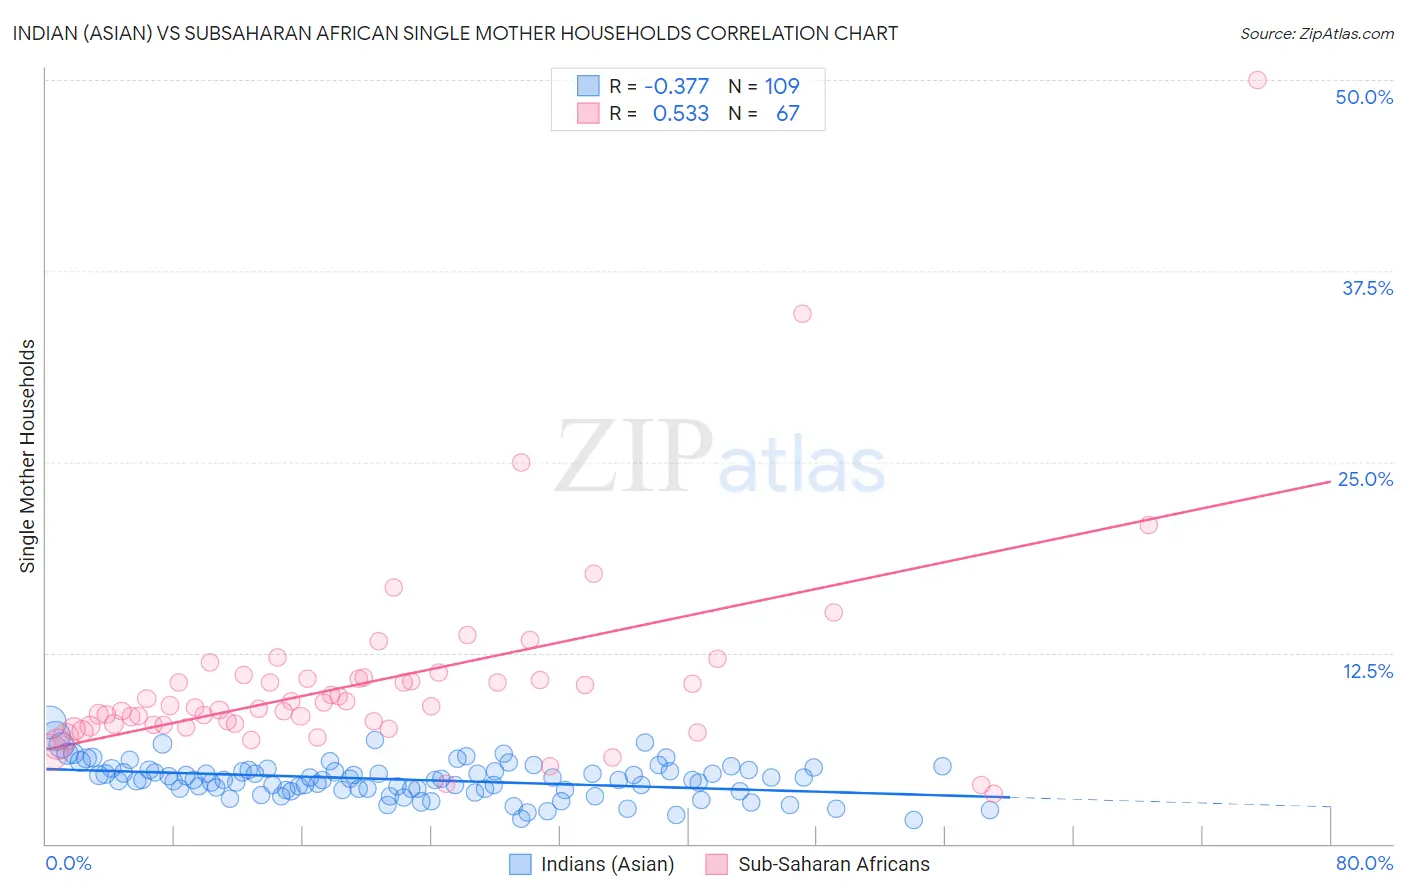 Indian (Asian) vs Subsaharan African Single Mother Households